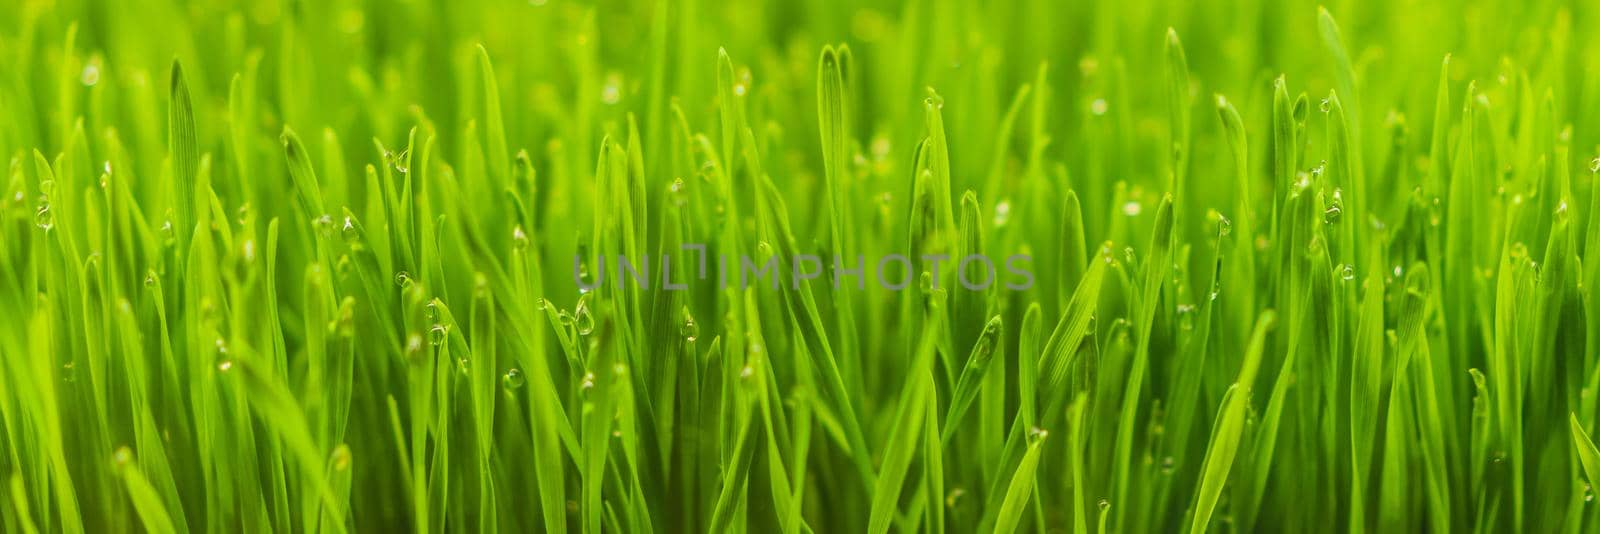 Fresh Wheatgrass plant organic for squeeze juice, Nutritious homegrown Wheatgrass, green wheat sprouts for juice BANNER, LONG FORMAT by galitskaya